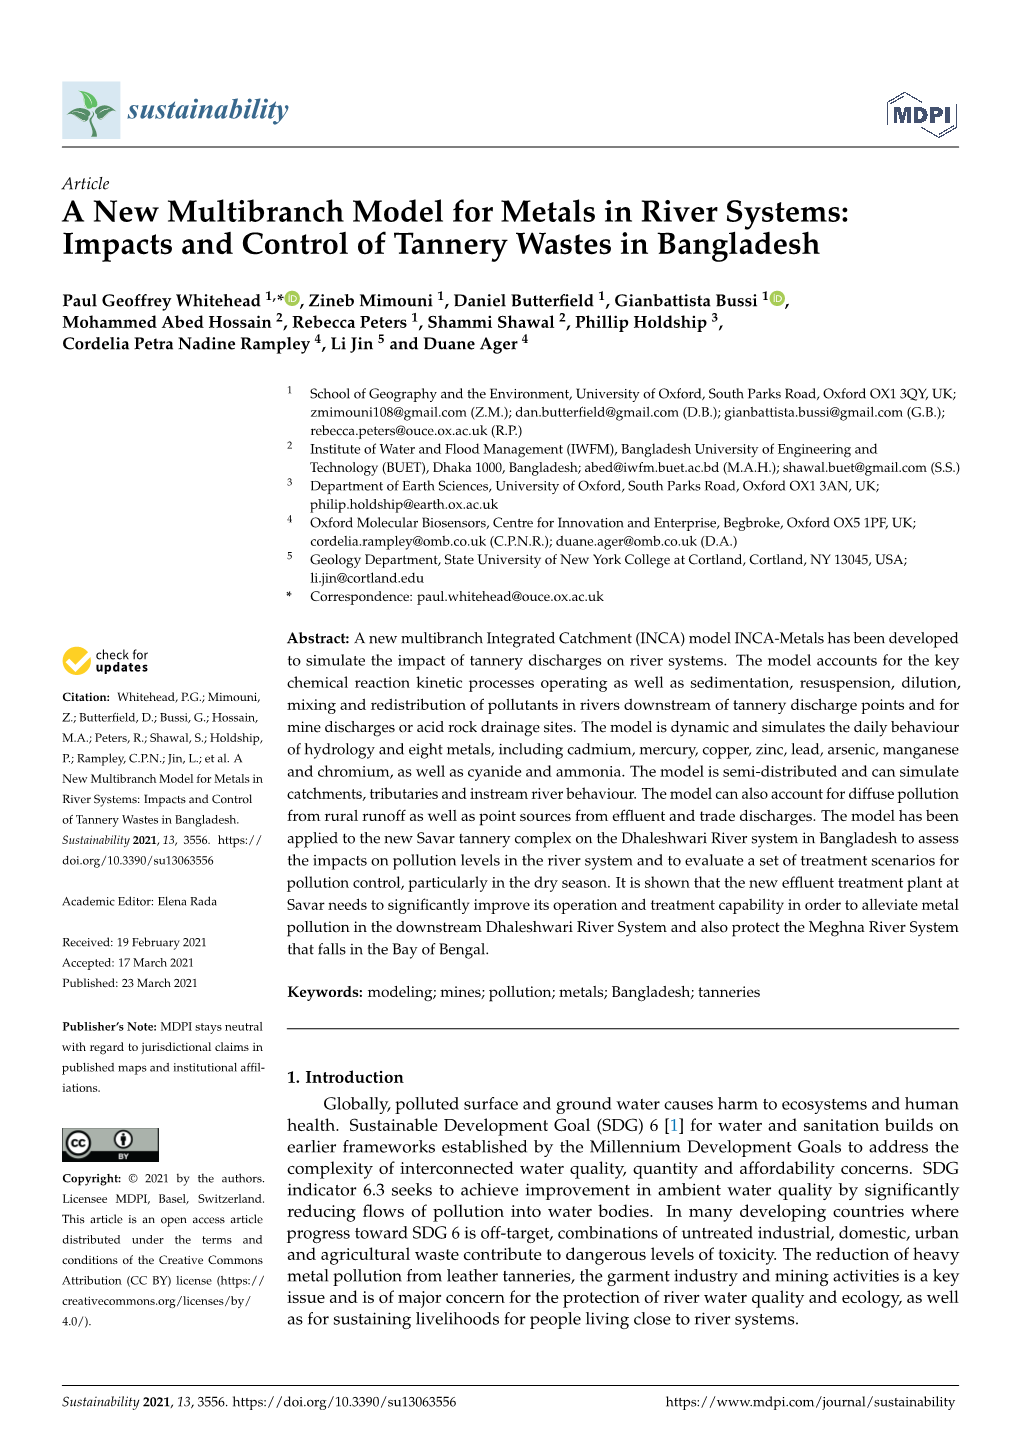 Impacts and Control of Tannery Wastes in Bangladesh